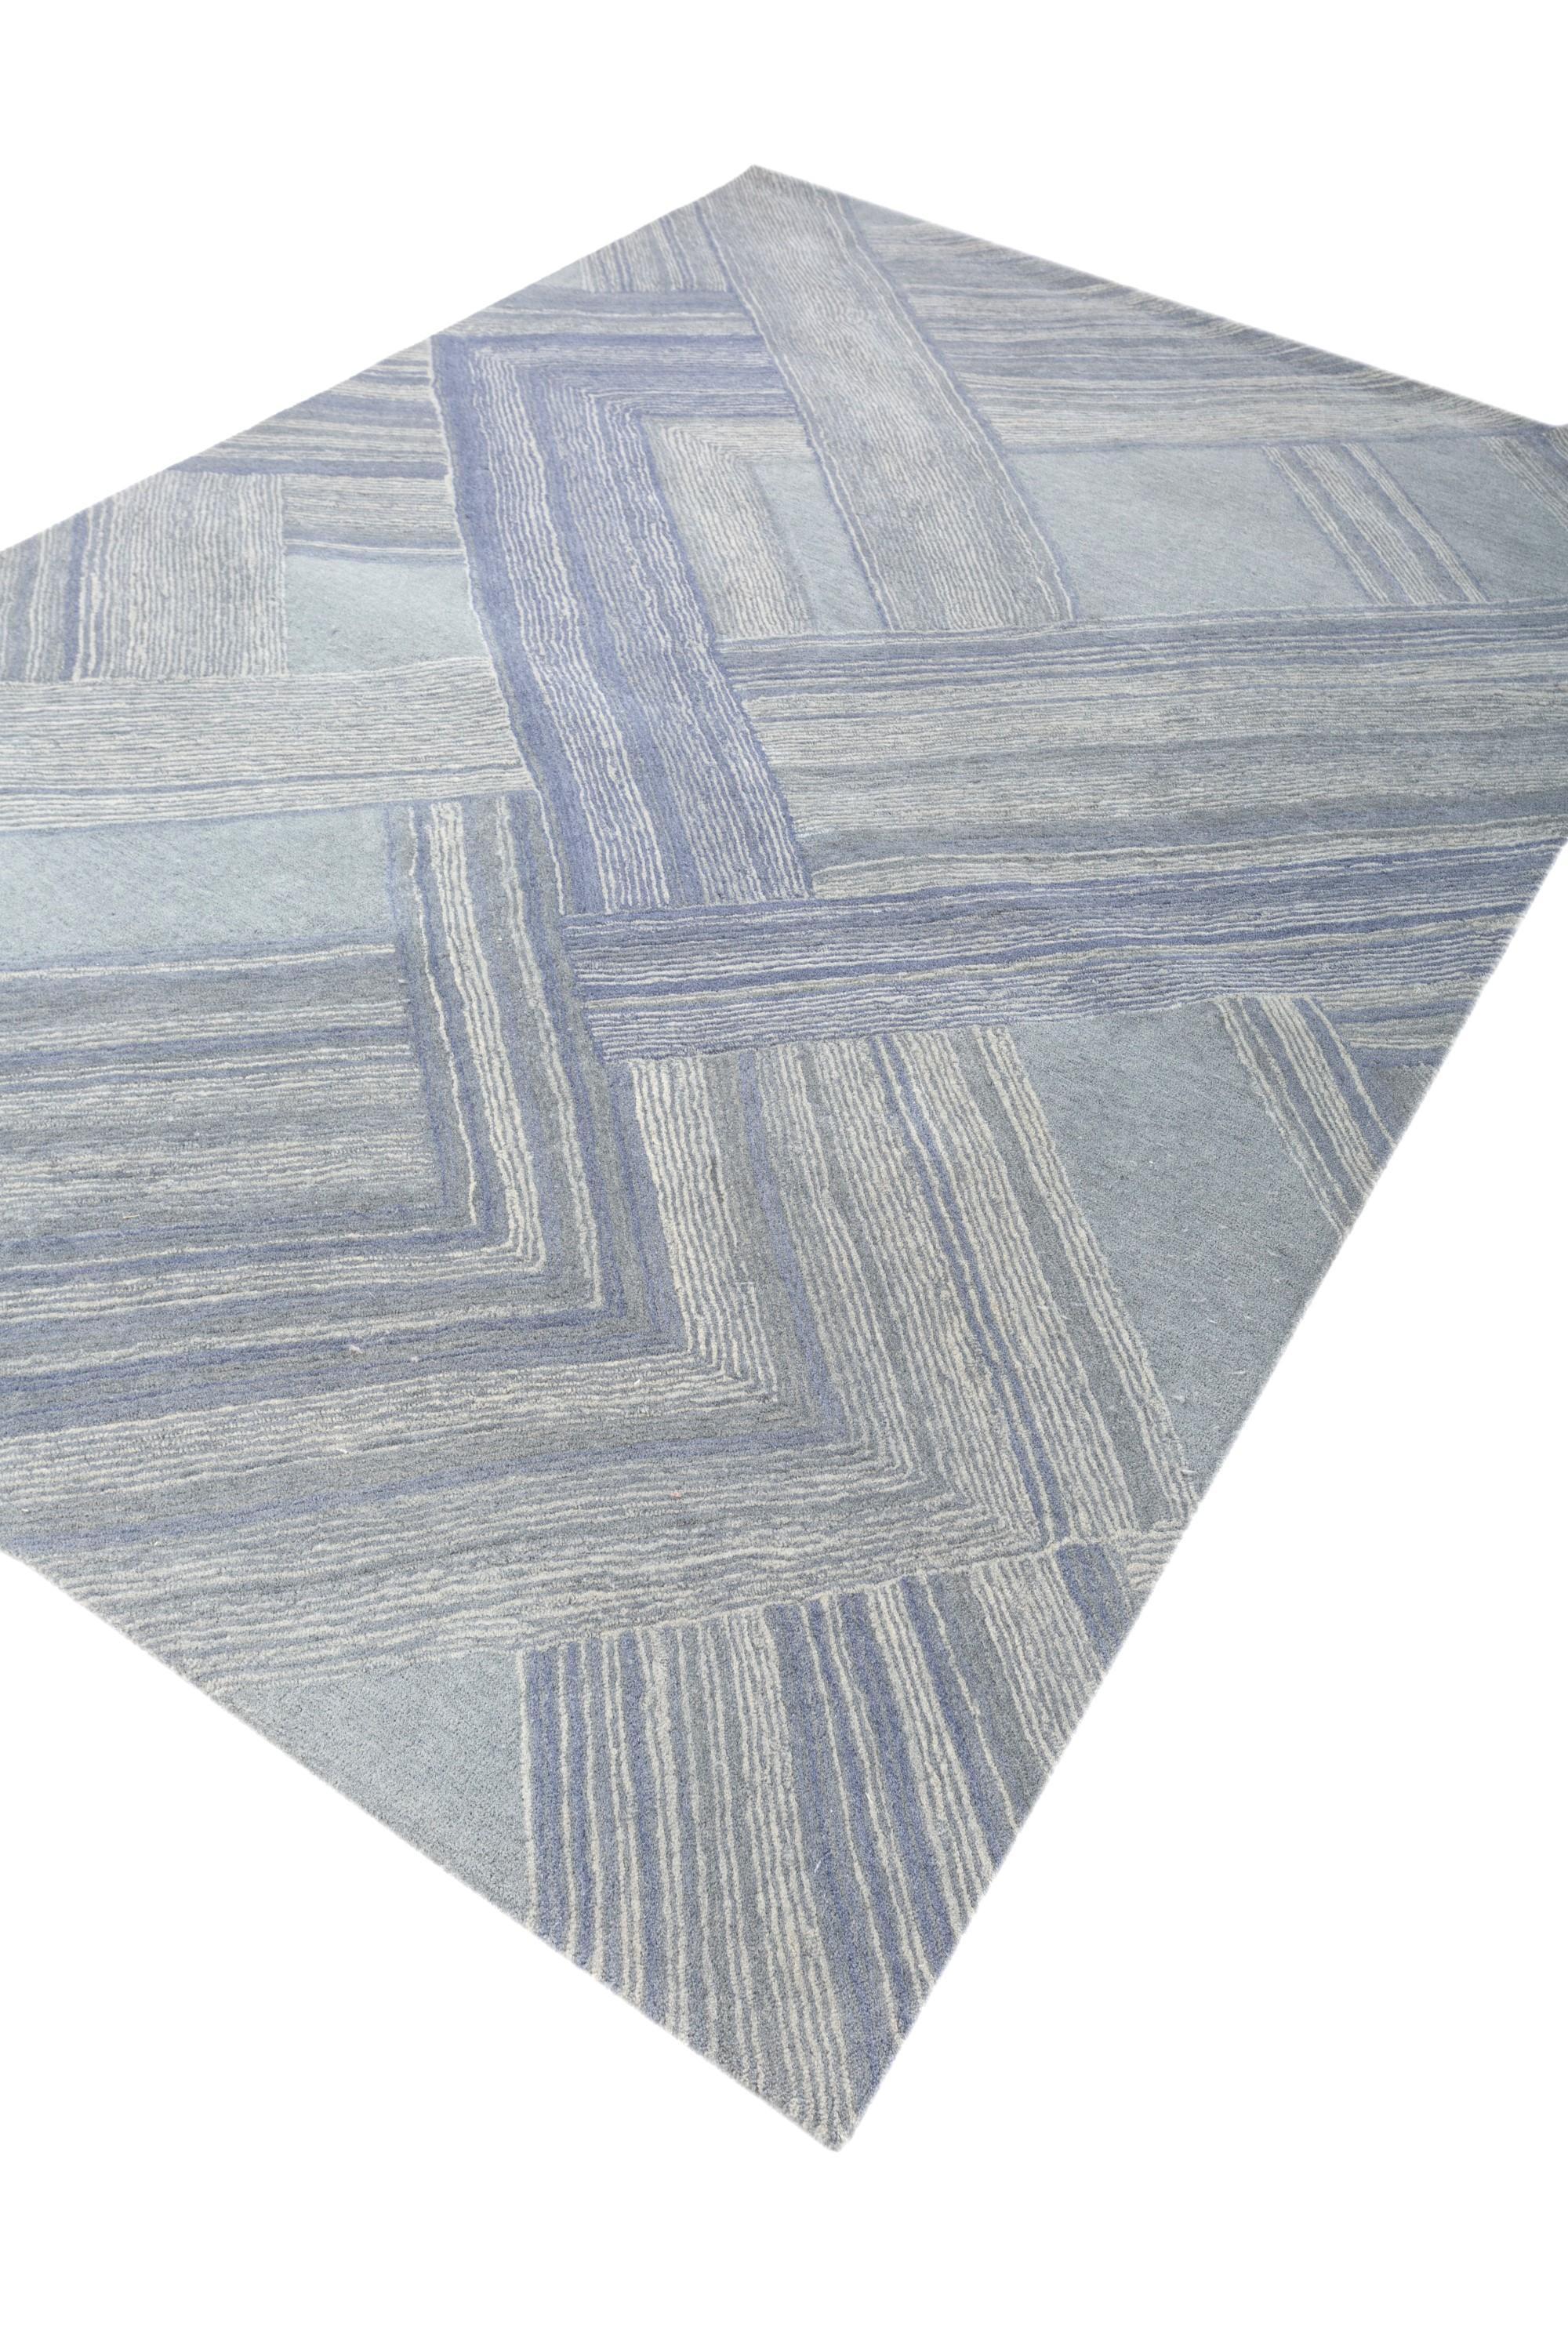 Modern Chevron Tranquility Trooper Tapestry 180x270 cm Hand Tufted Rug For Sale